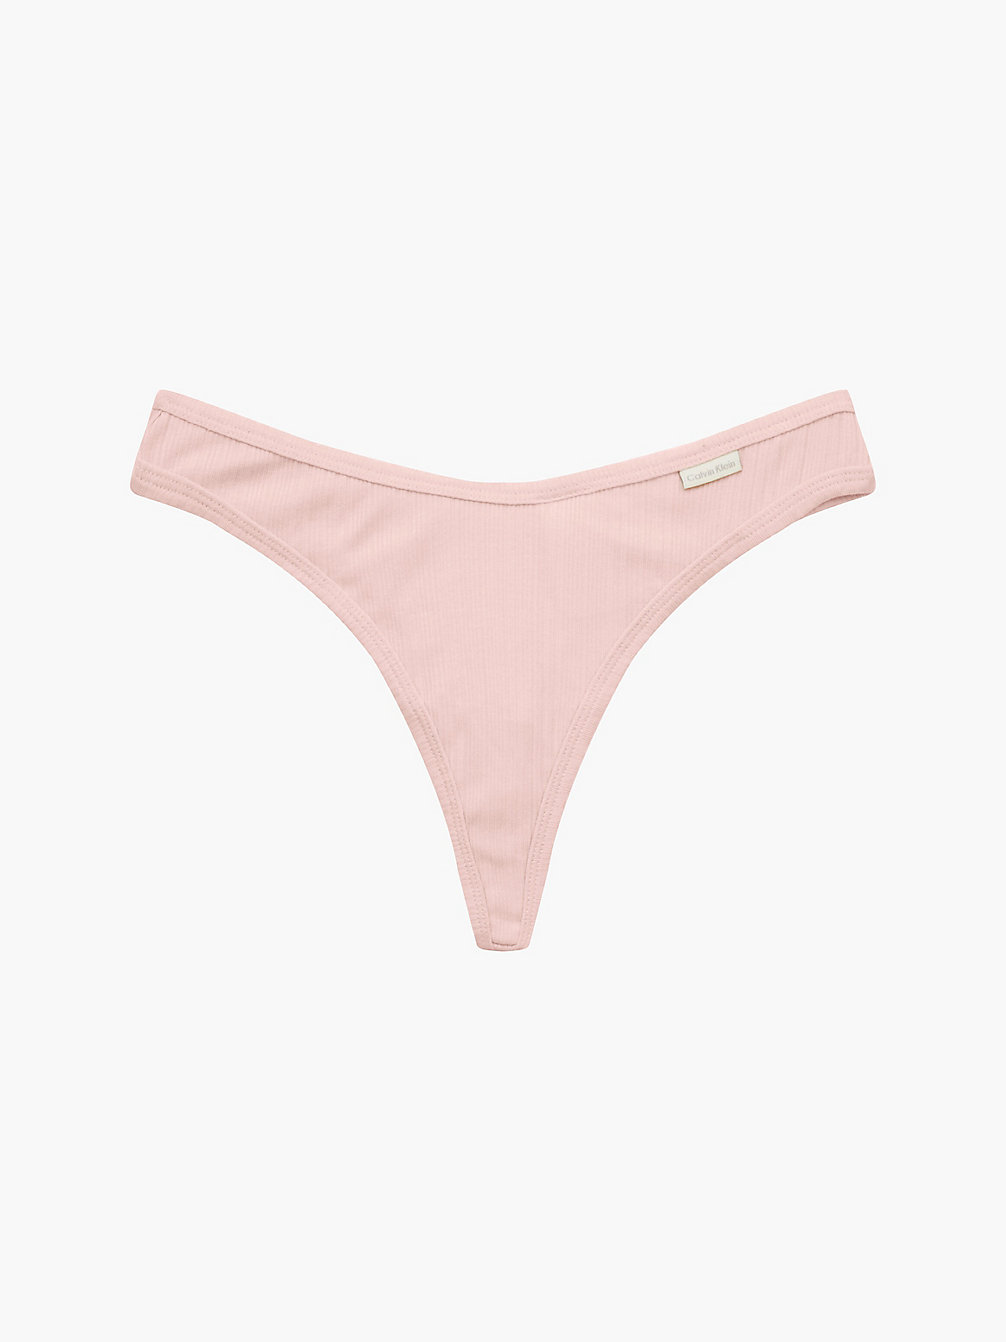 BARELY PINK > Стринги - Pure Ribbed > undefined Женщины - Calvin Klein